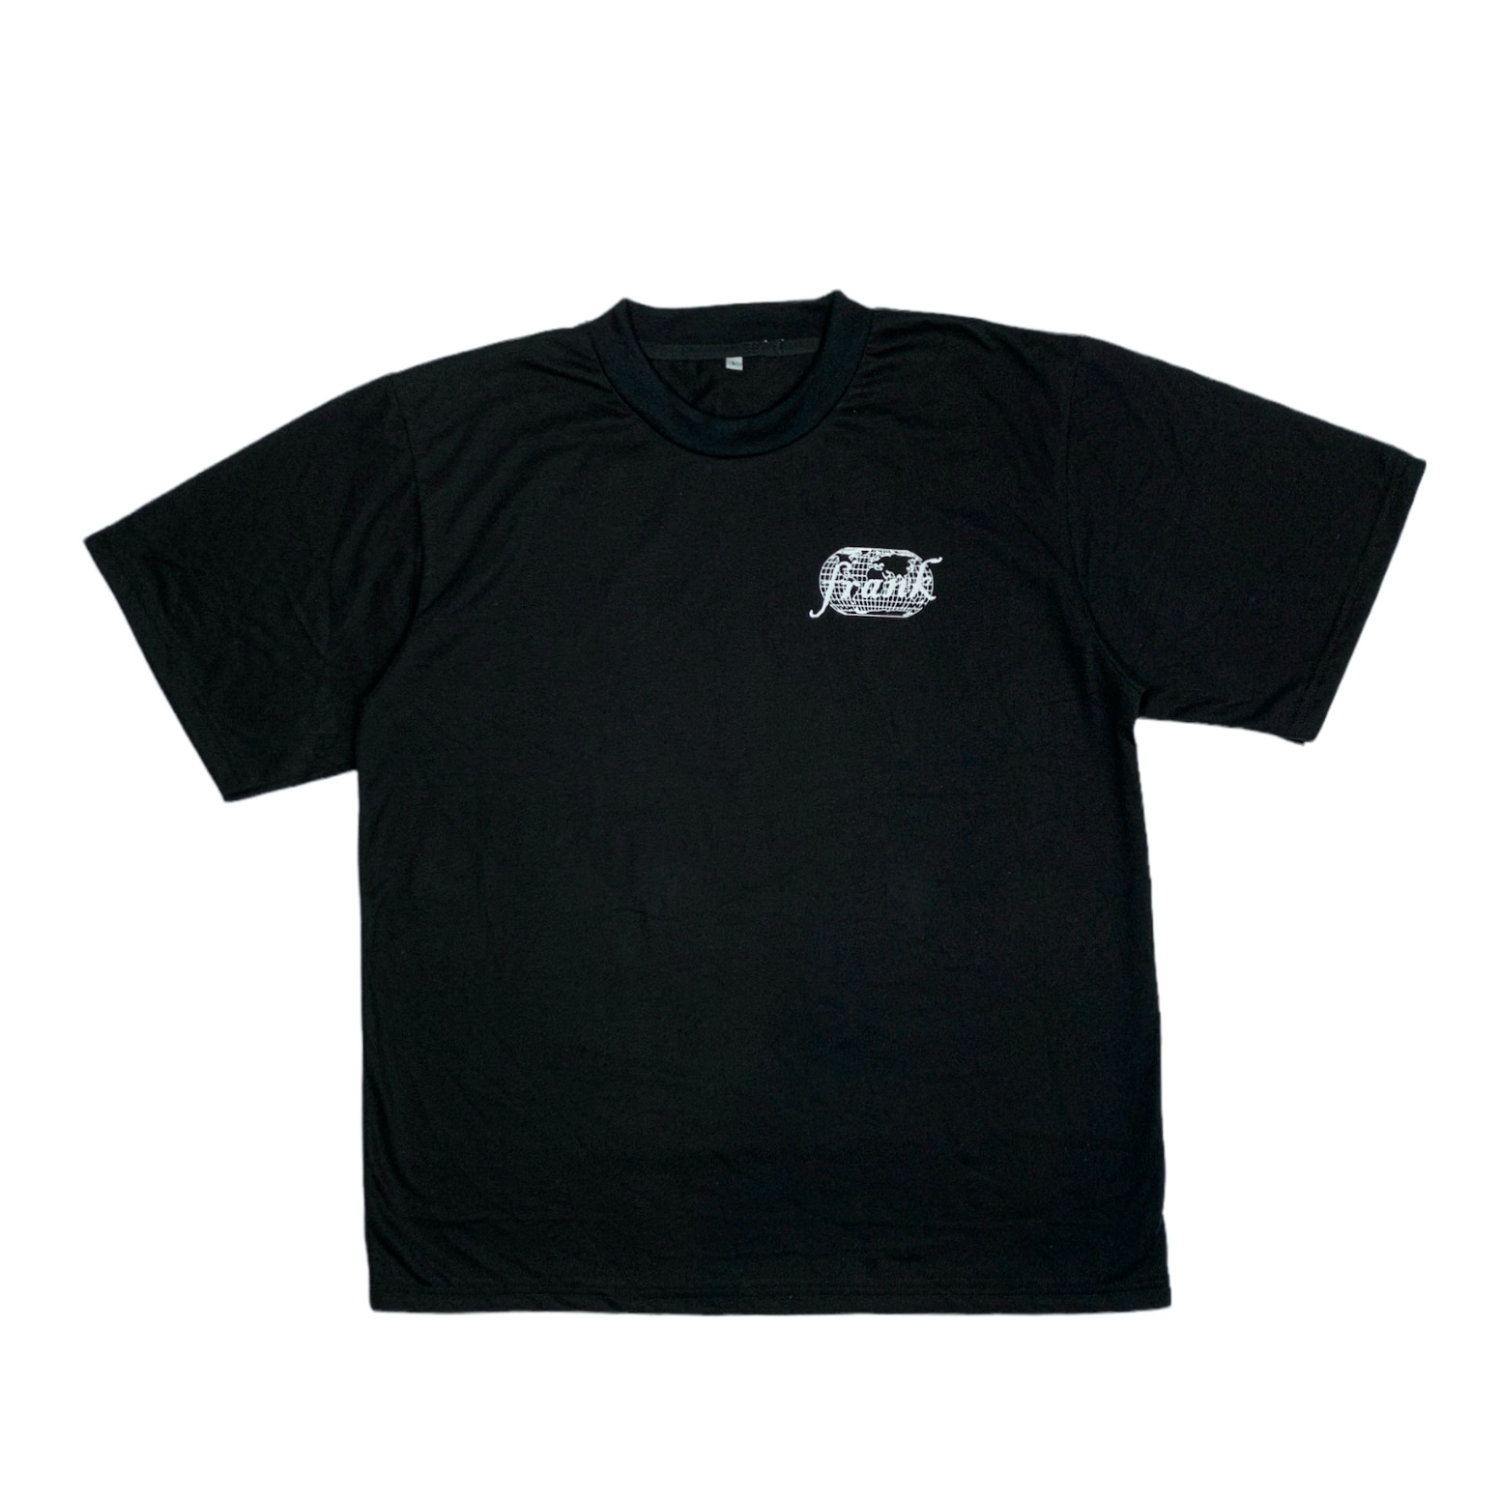 Our Planet Tee (Black)